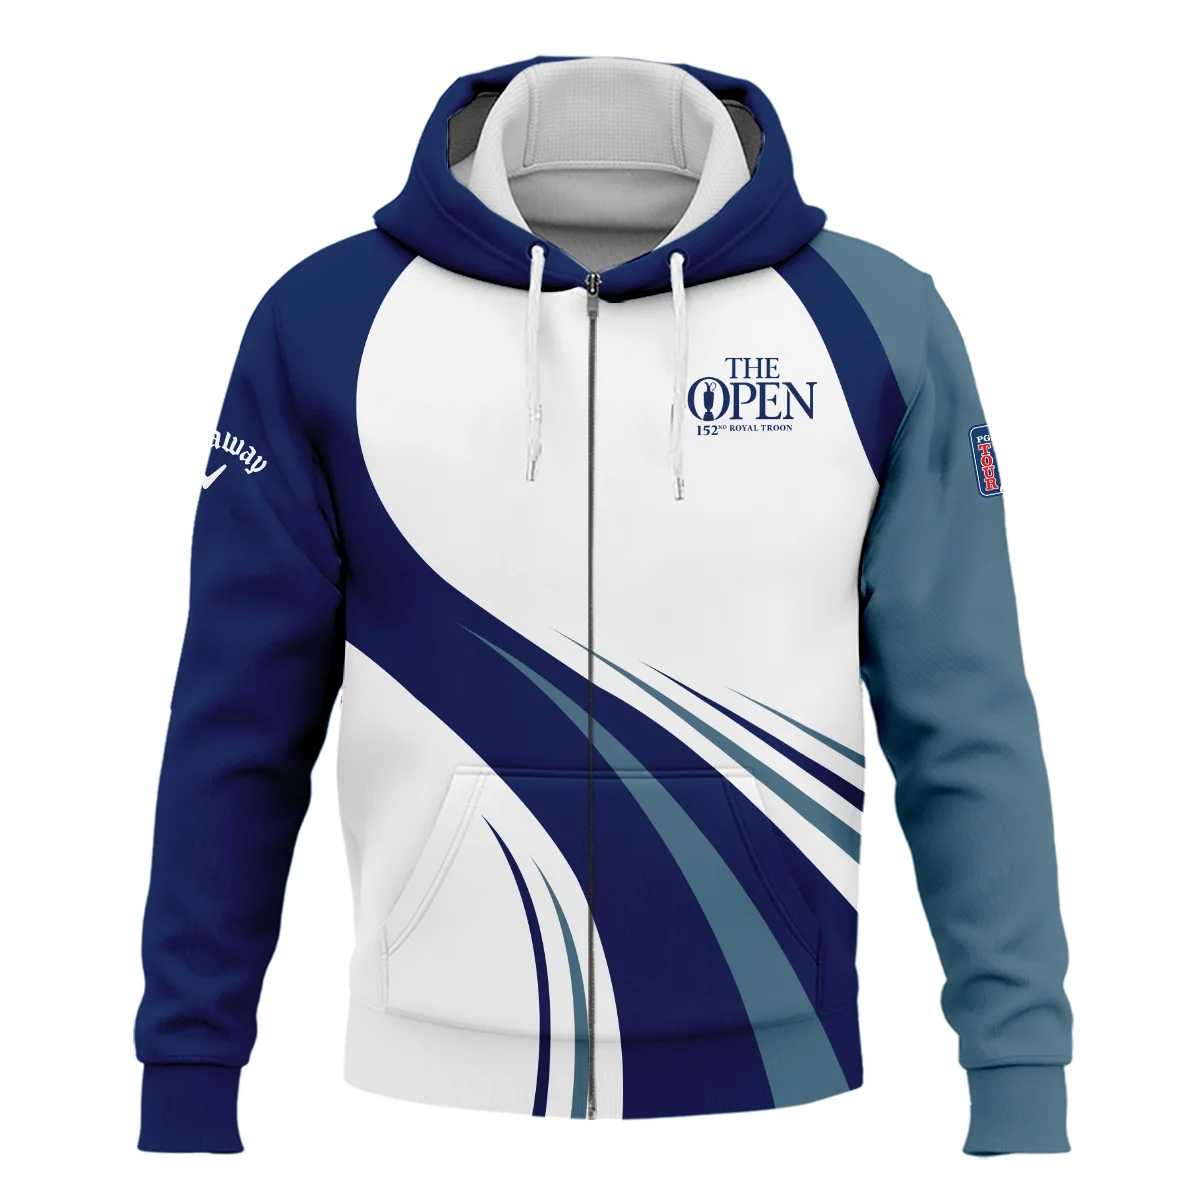 152nd Open Championship Callaway White Mostly Desaturated Dark Blue Zipper Hoodie Shirt All Over Prints HOTOP270624A02CLWZHD